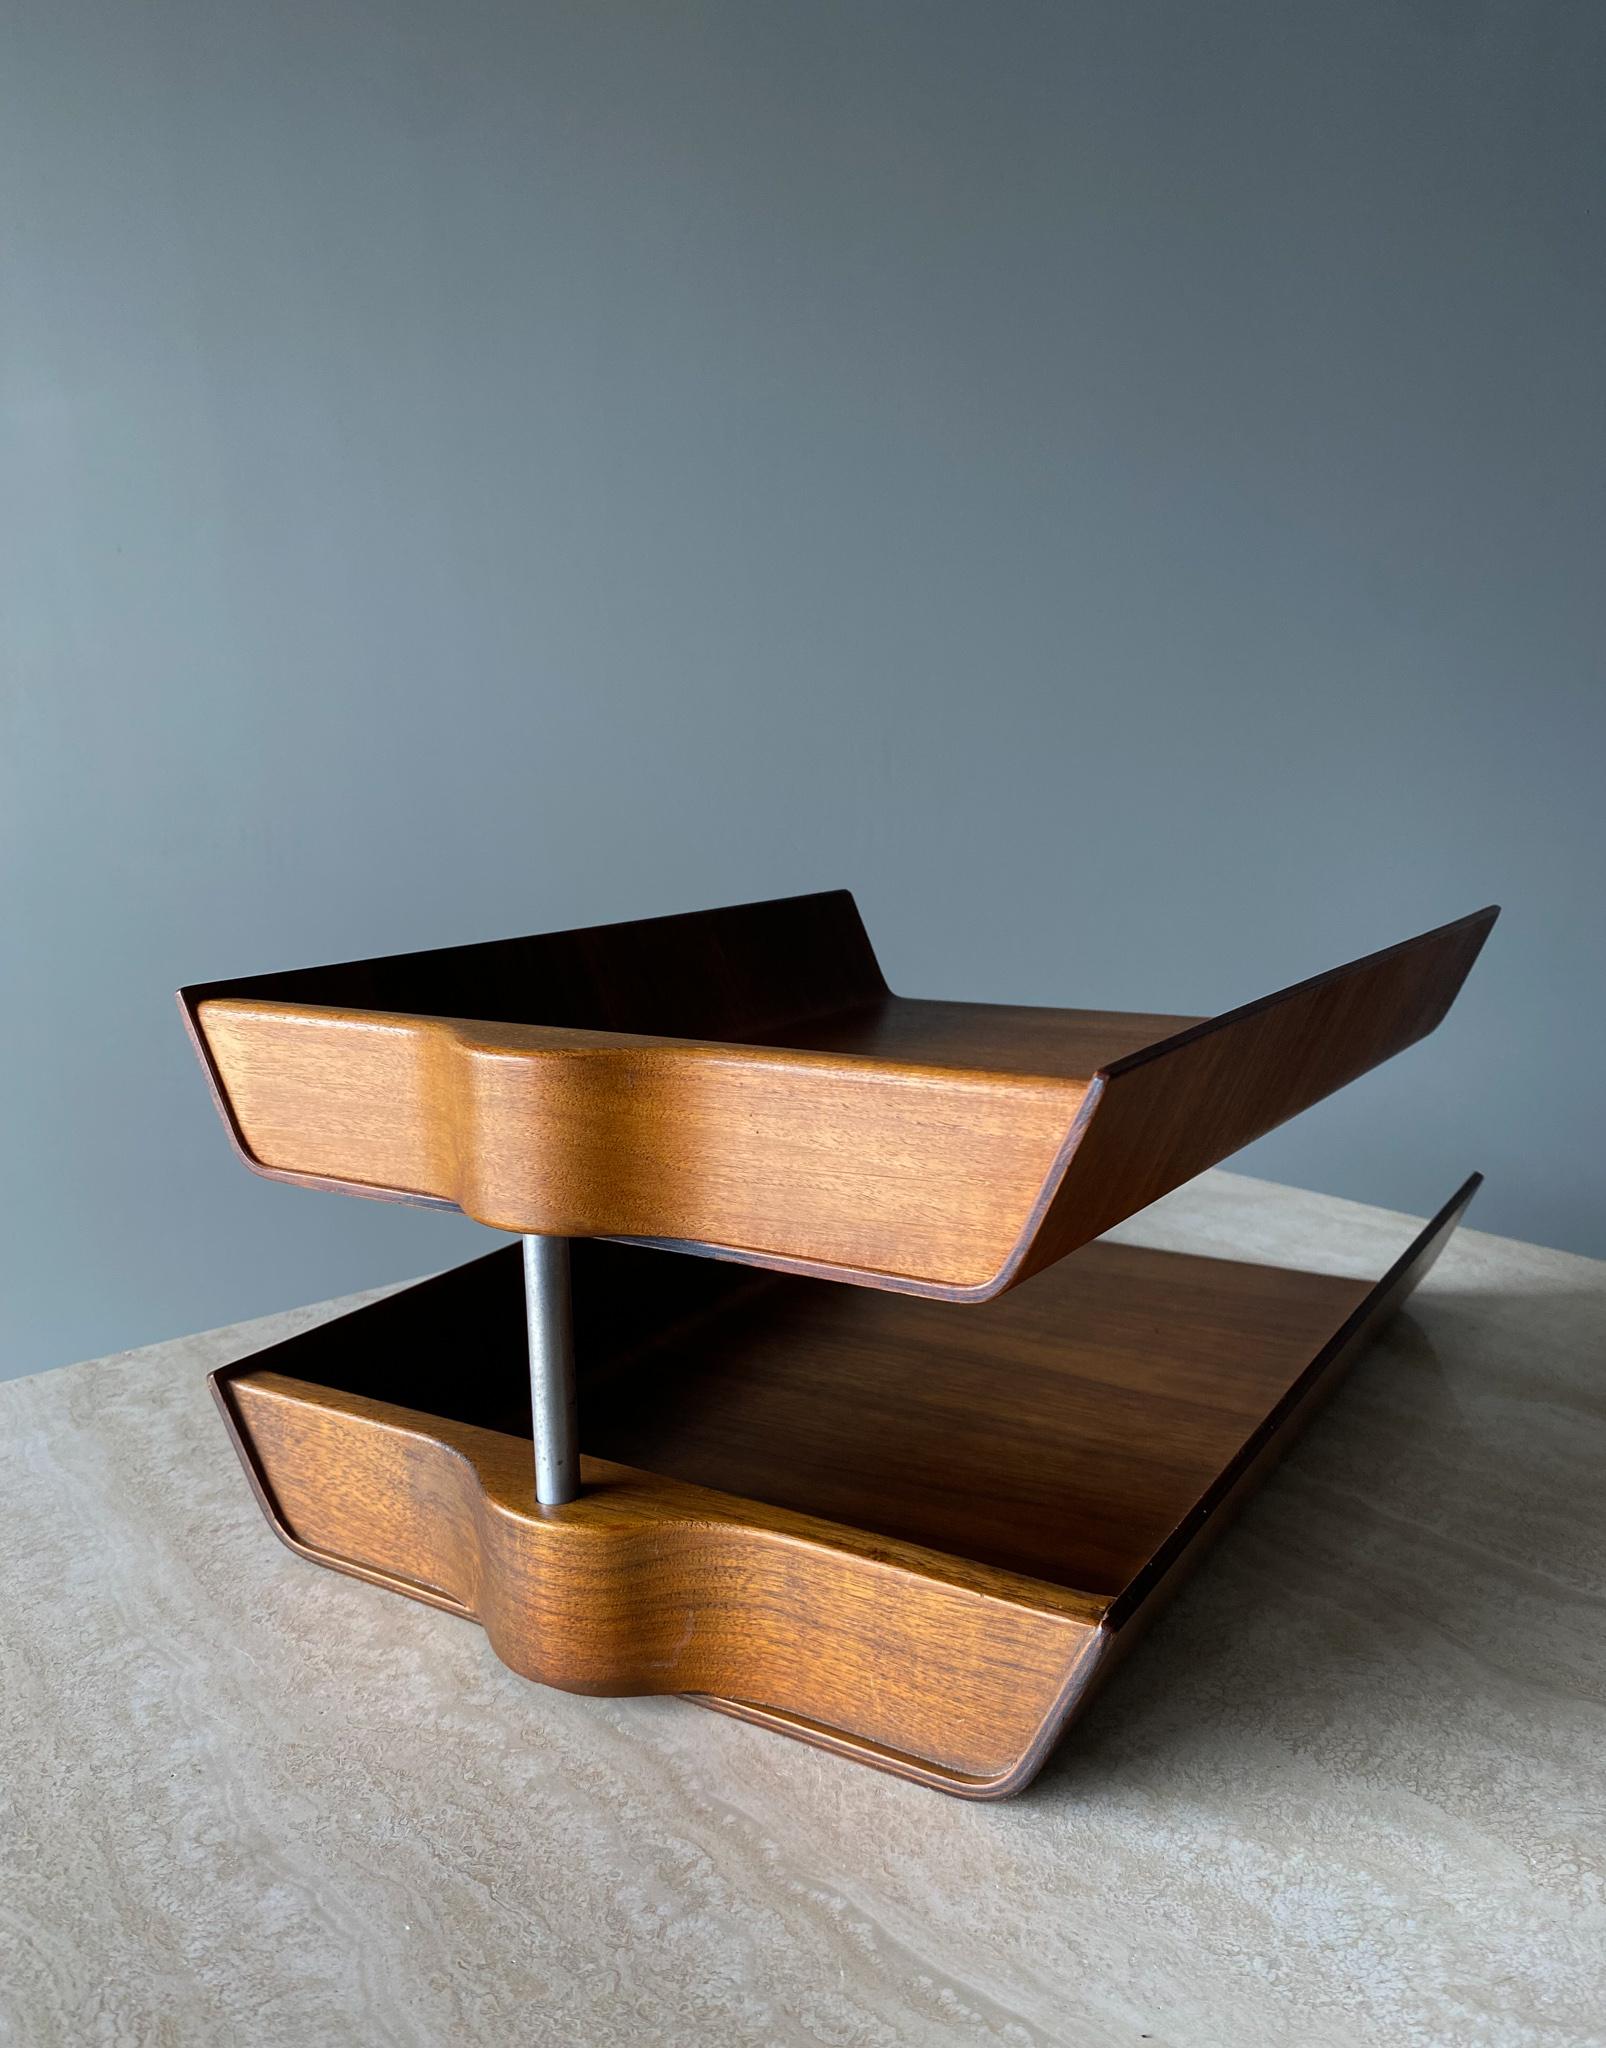 Florence Knoll Molded Plywood Architectural Letter Tray, 1960s For Sale 4